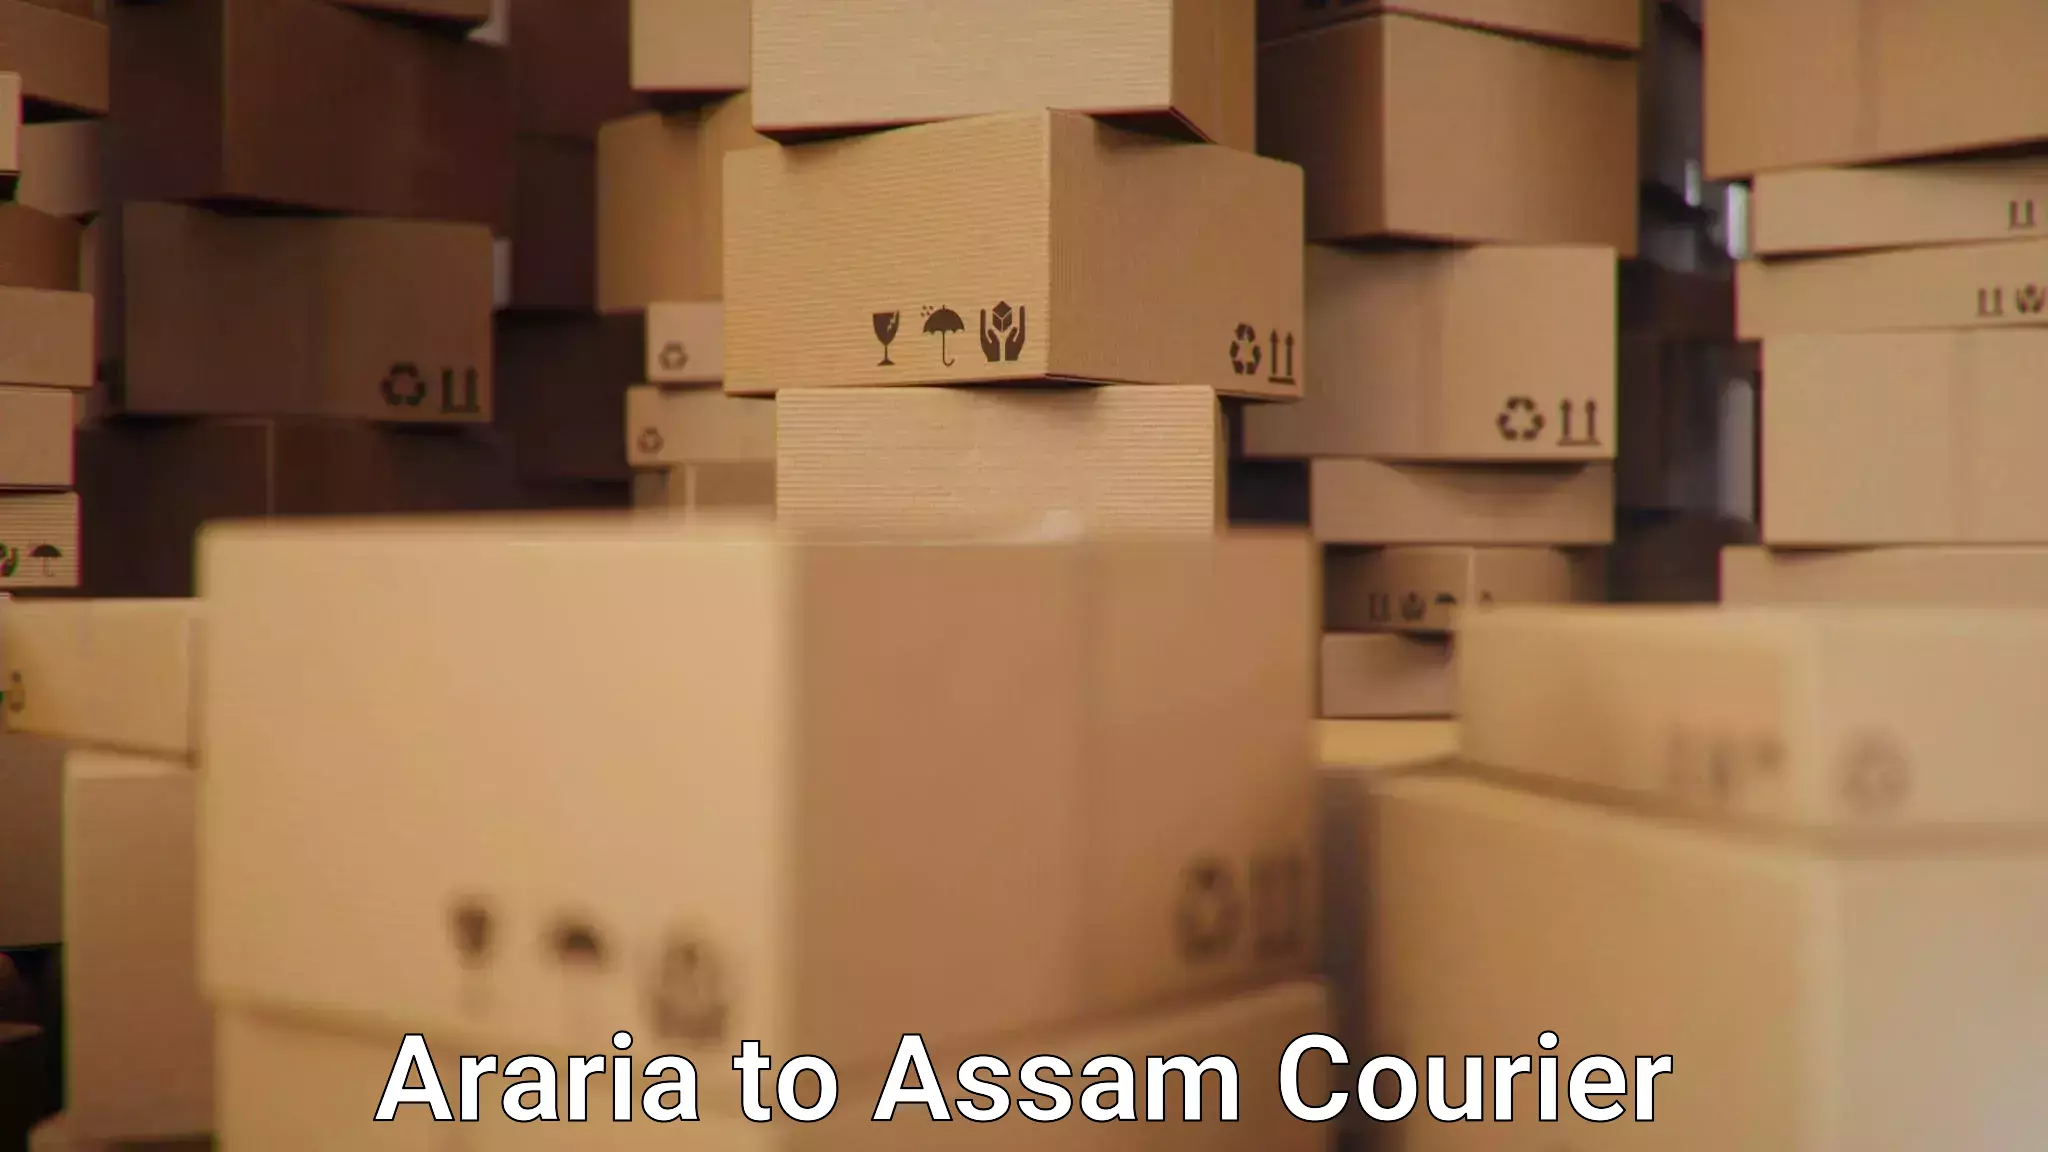 Business delivery service Araria to Assam